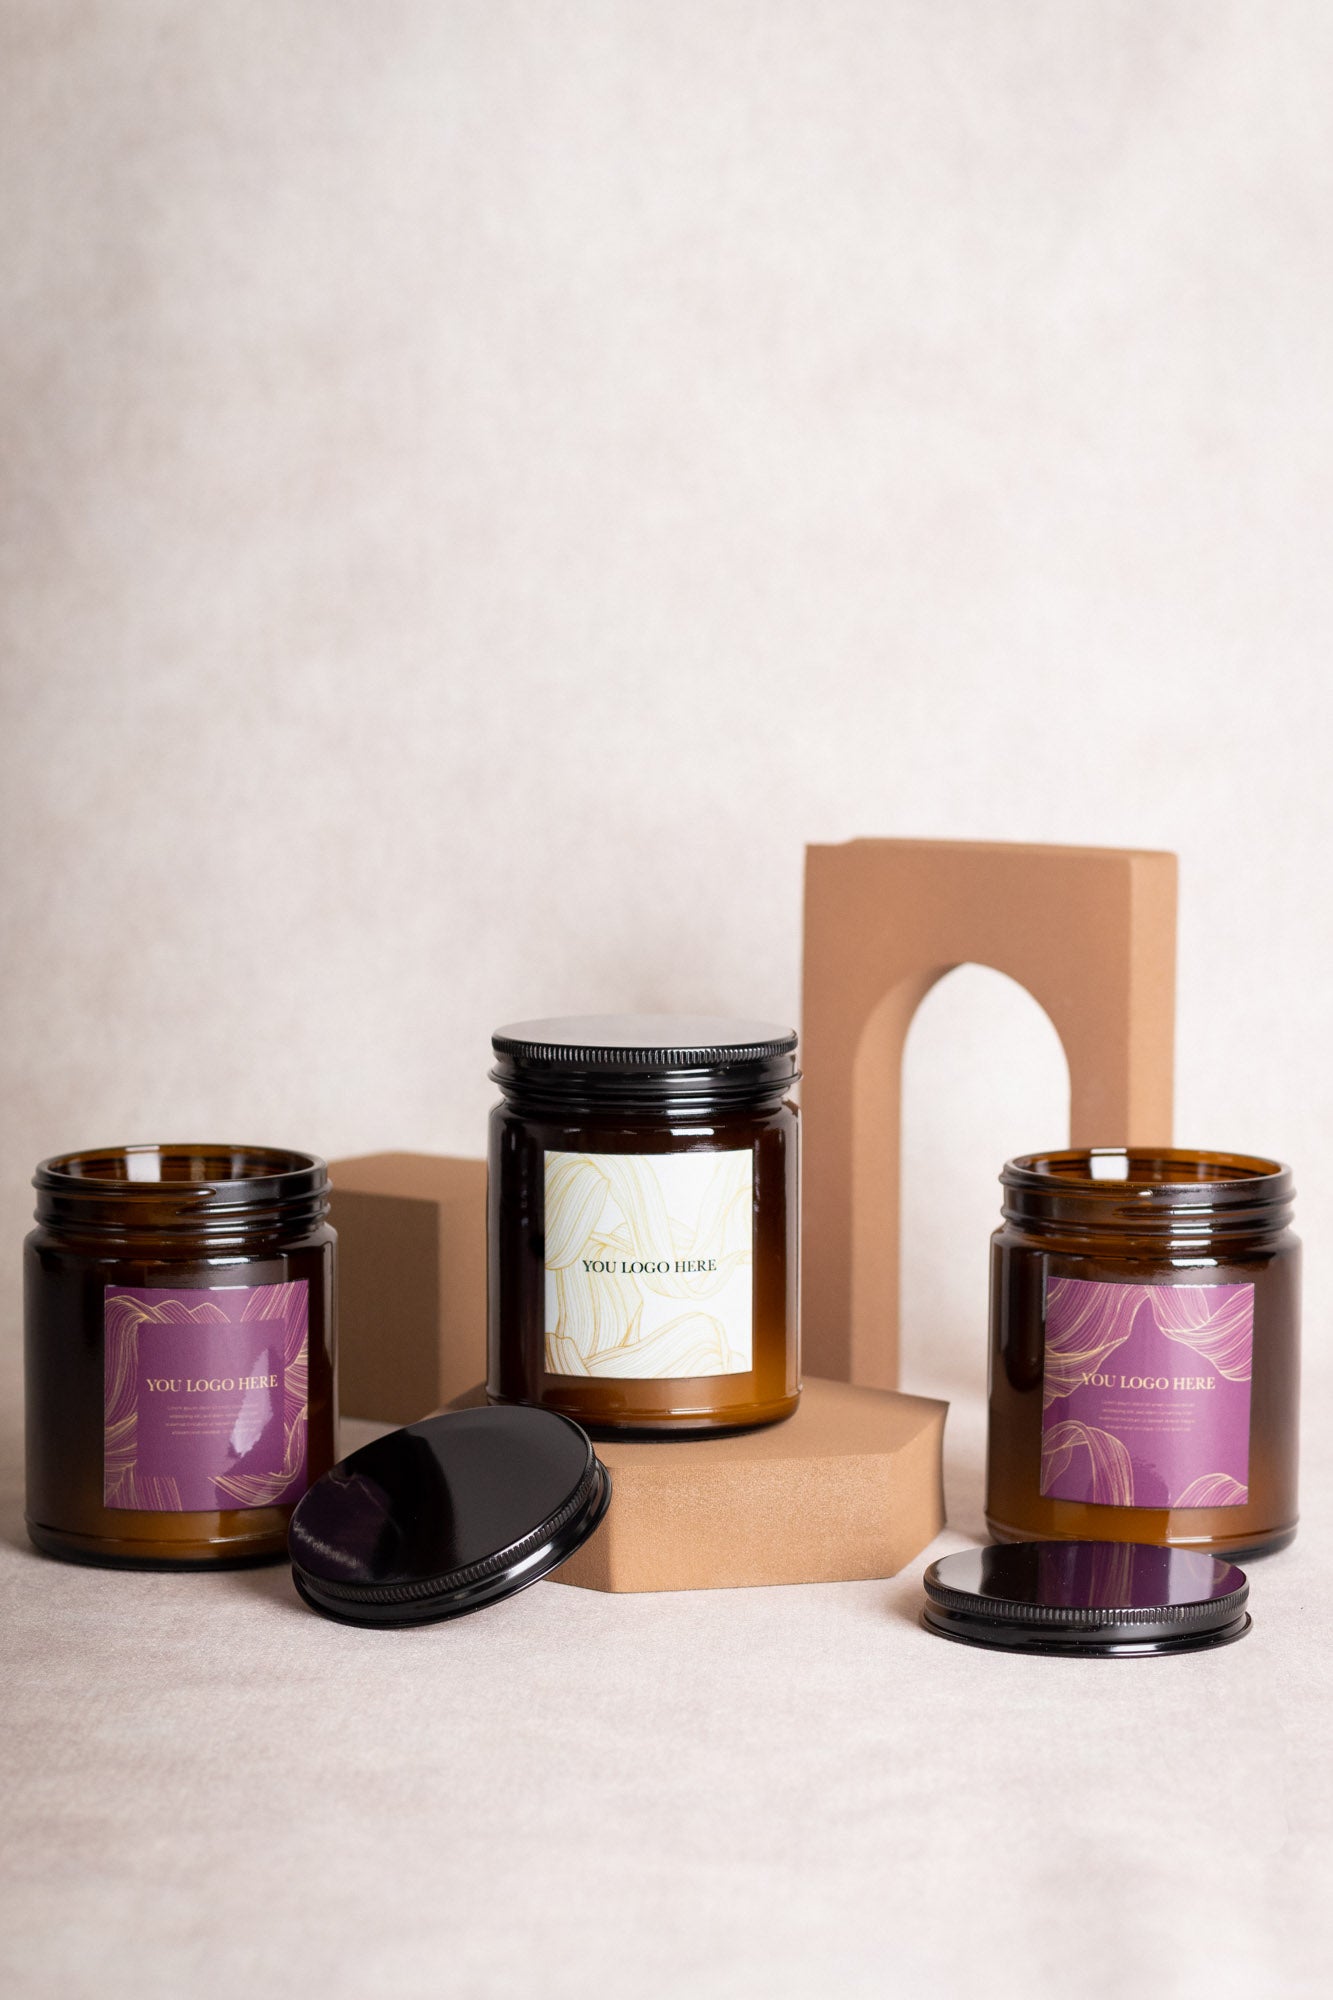 Premier Branded Candle Gifts for Valued Clients